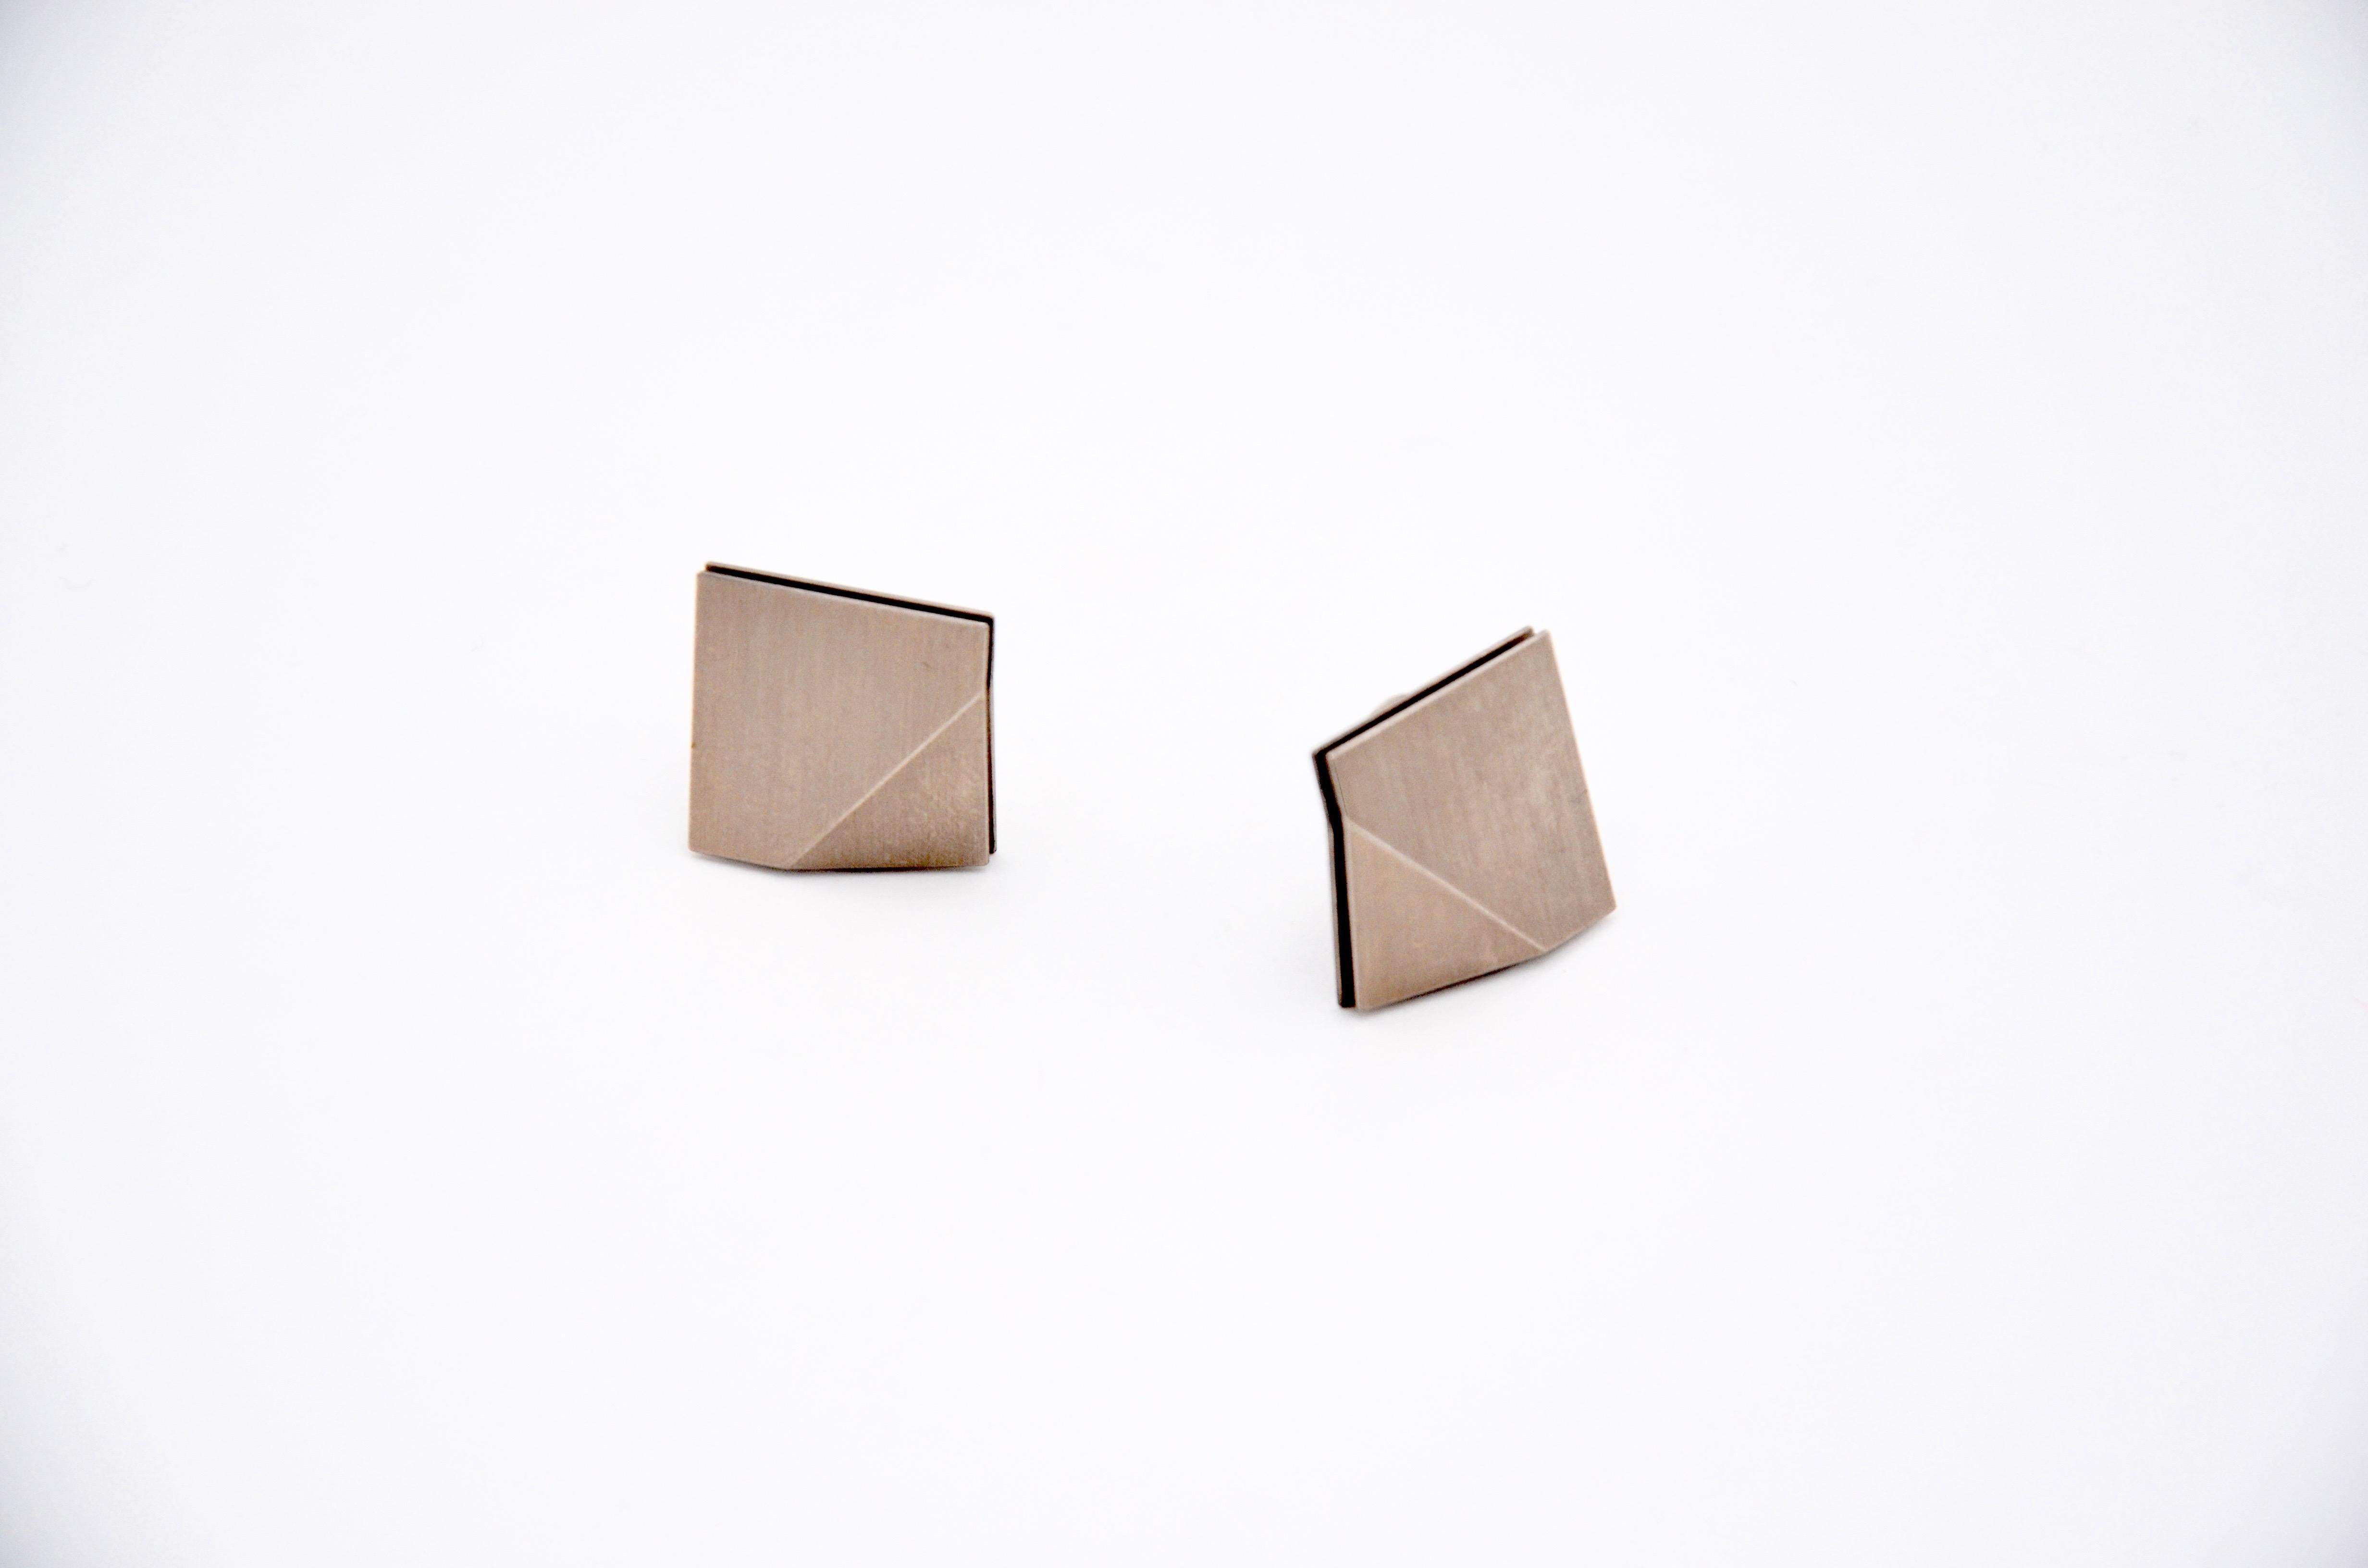 Contemporary 18 karat White Gold Ear Clips.

These craetions by Arno Schneider are delicate squares consisting of two layers and could be either Clips or customised as ear studs. The size makes them a basic go to piece that has this twist through